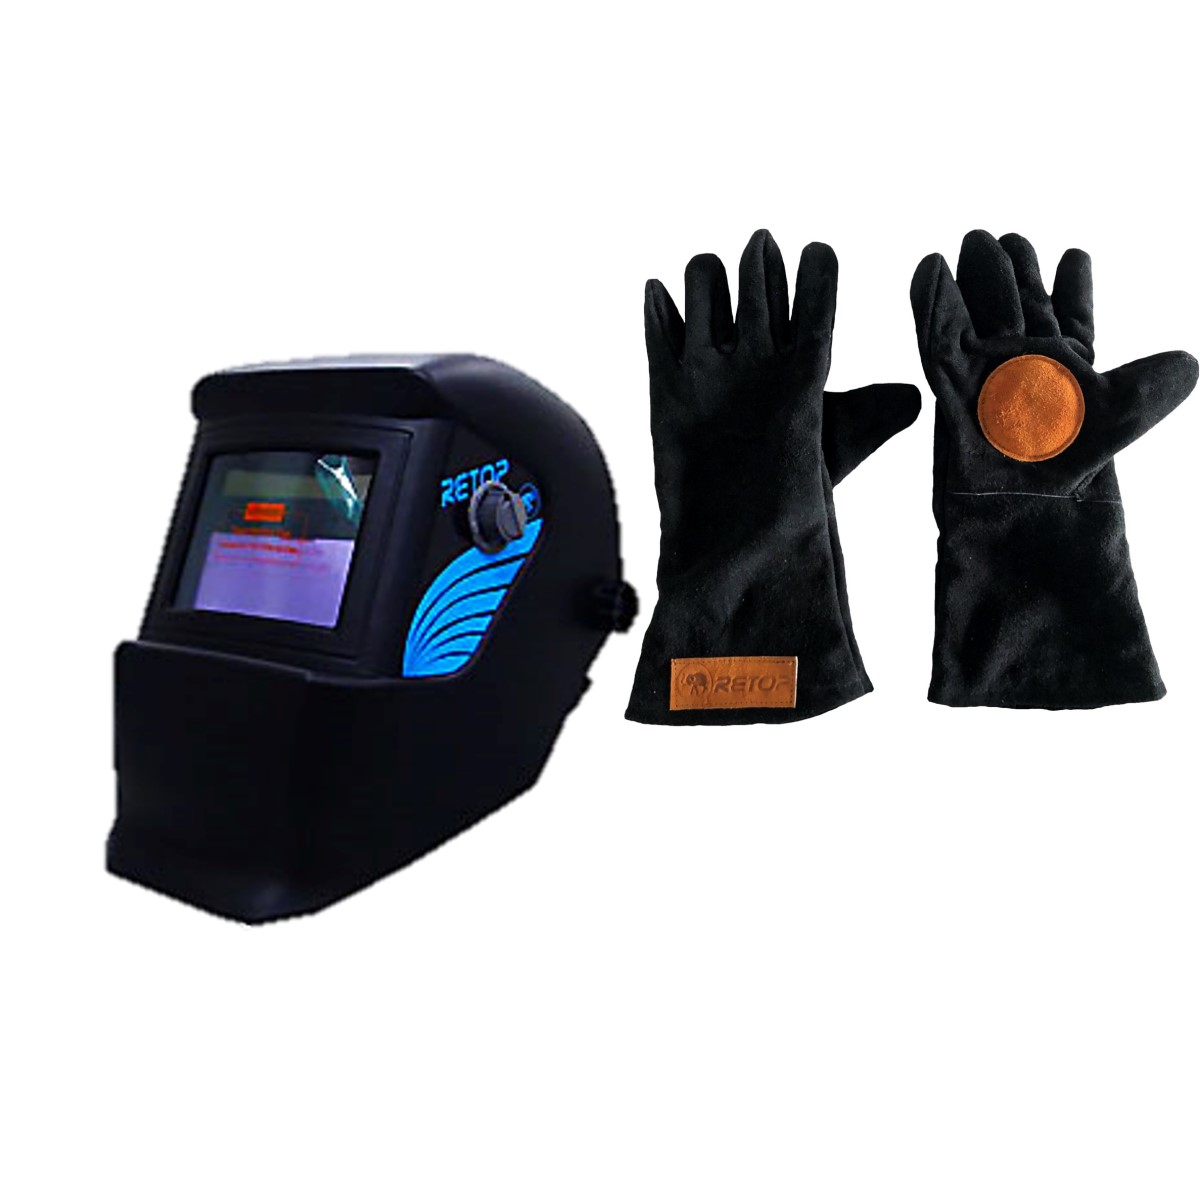 welding safety items